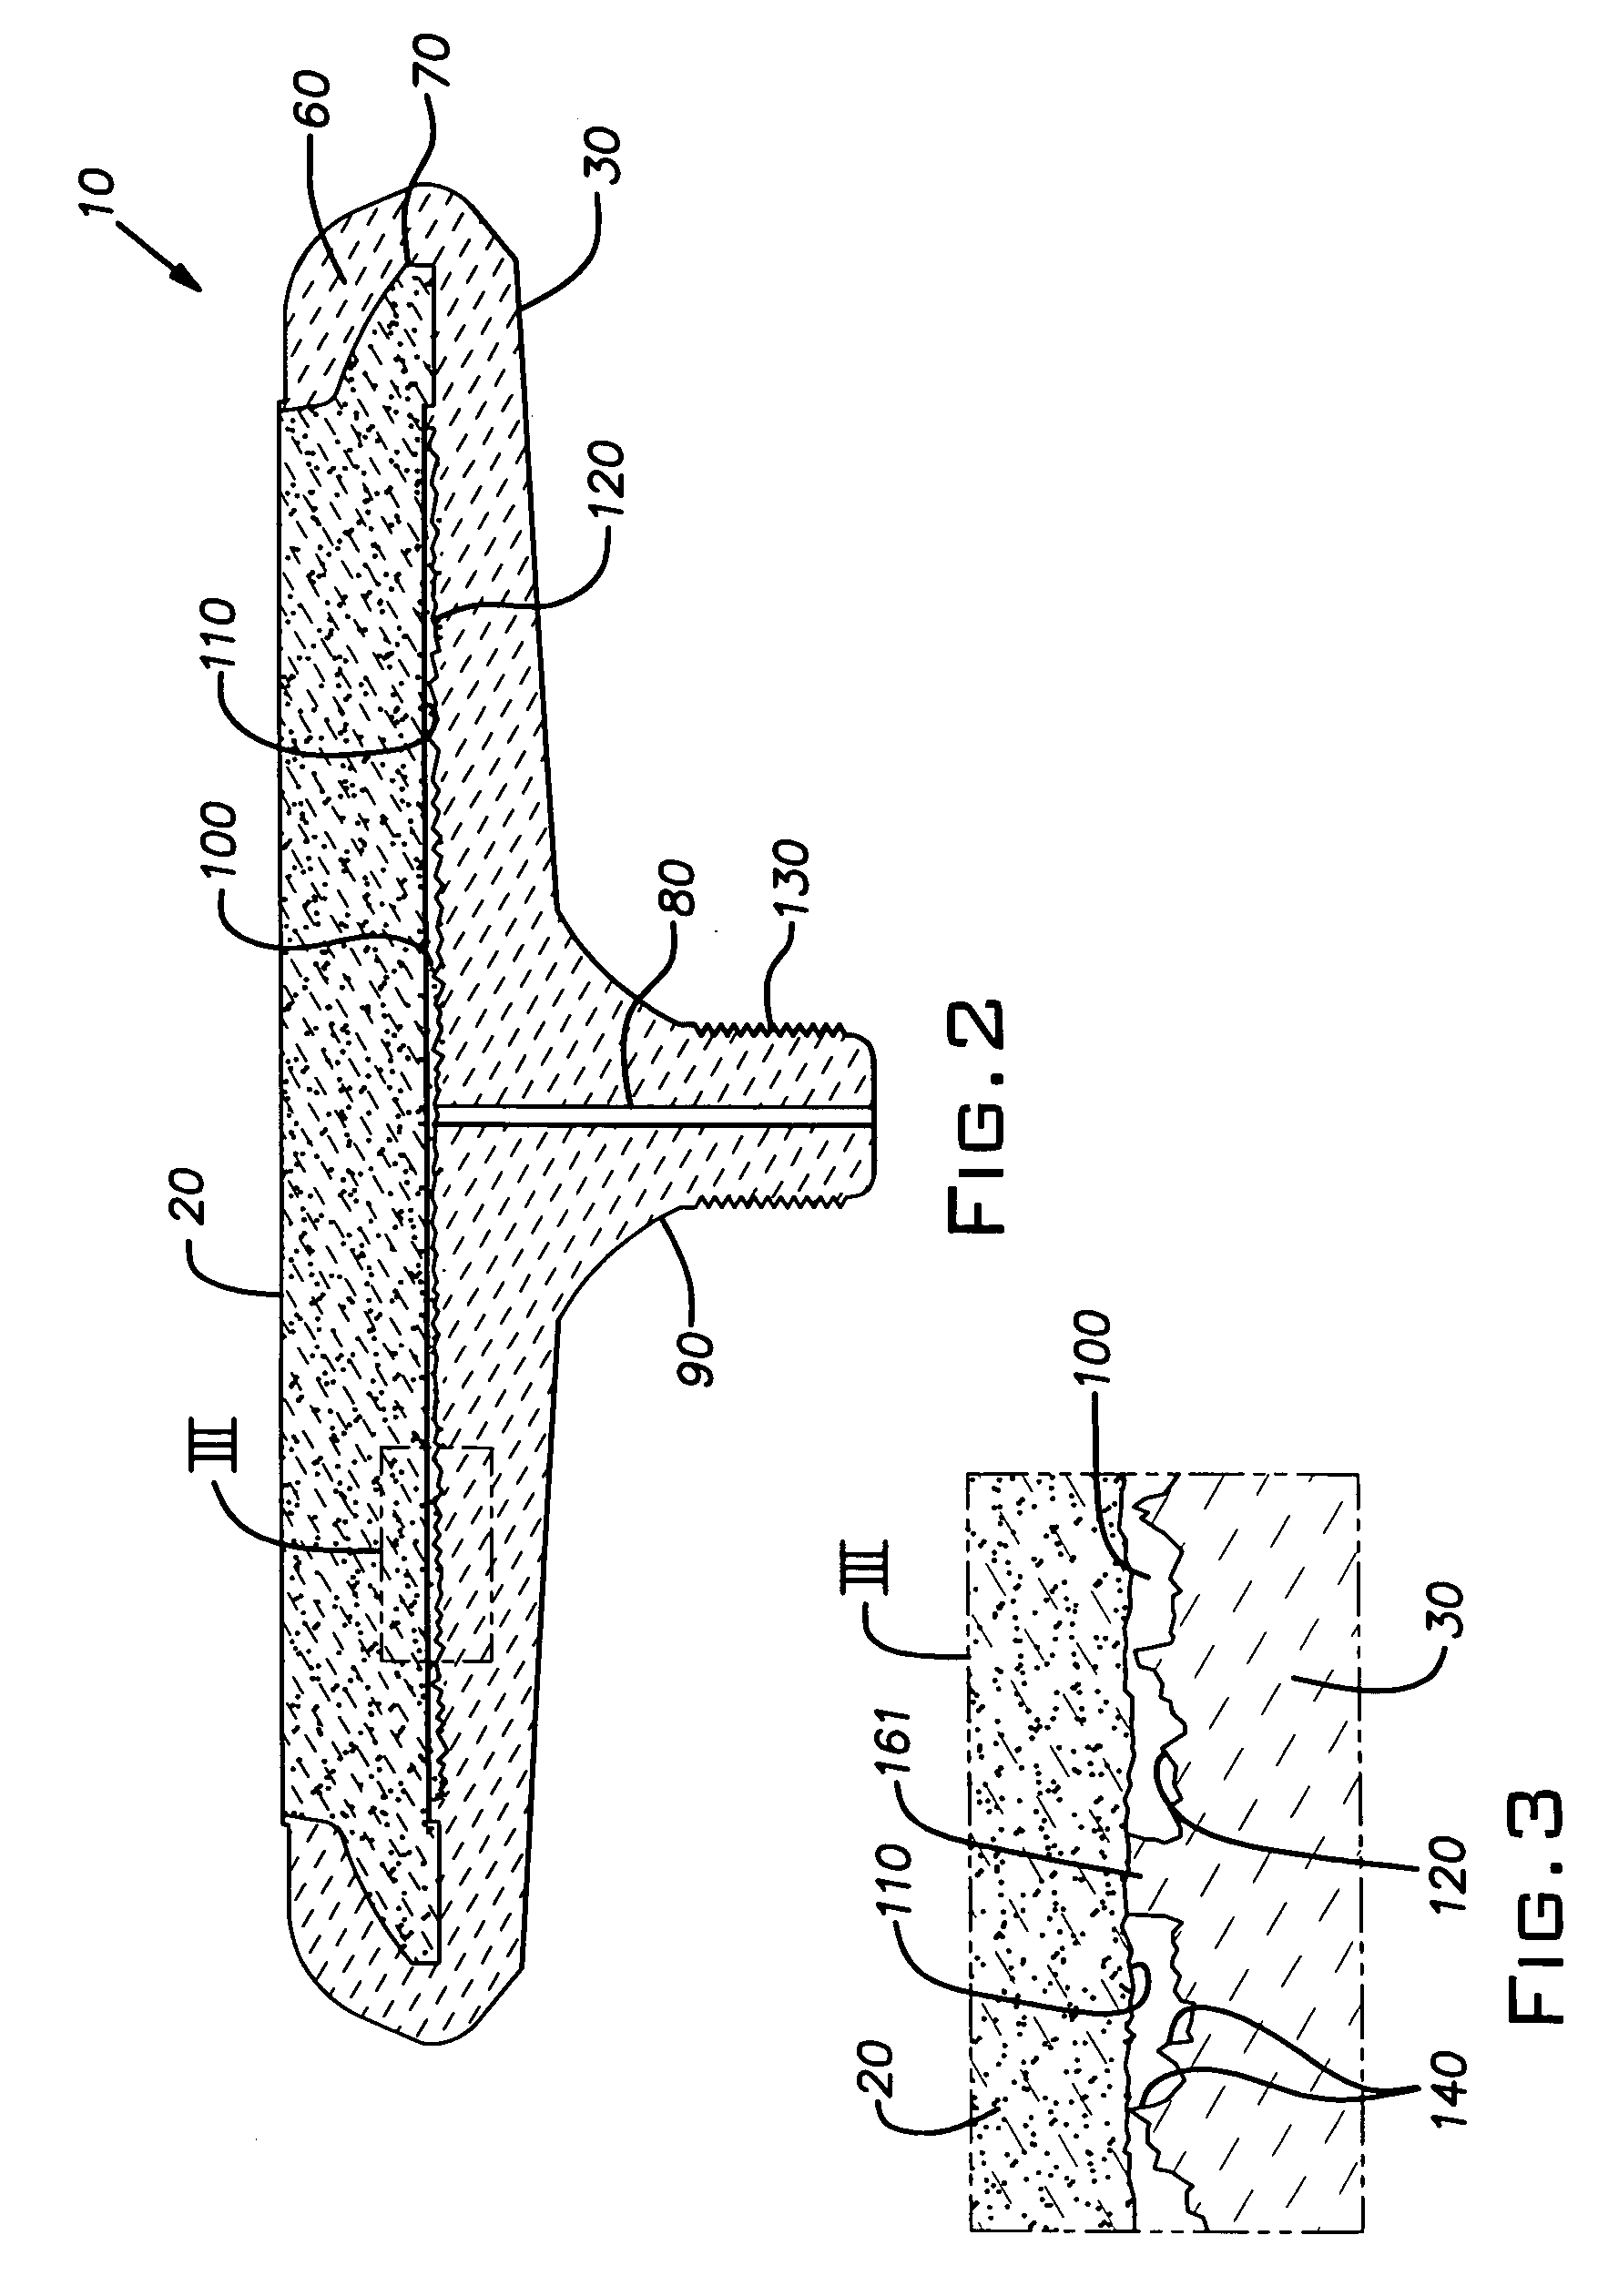 Method of making a diffuser assembly